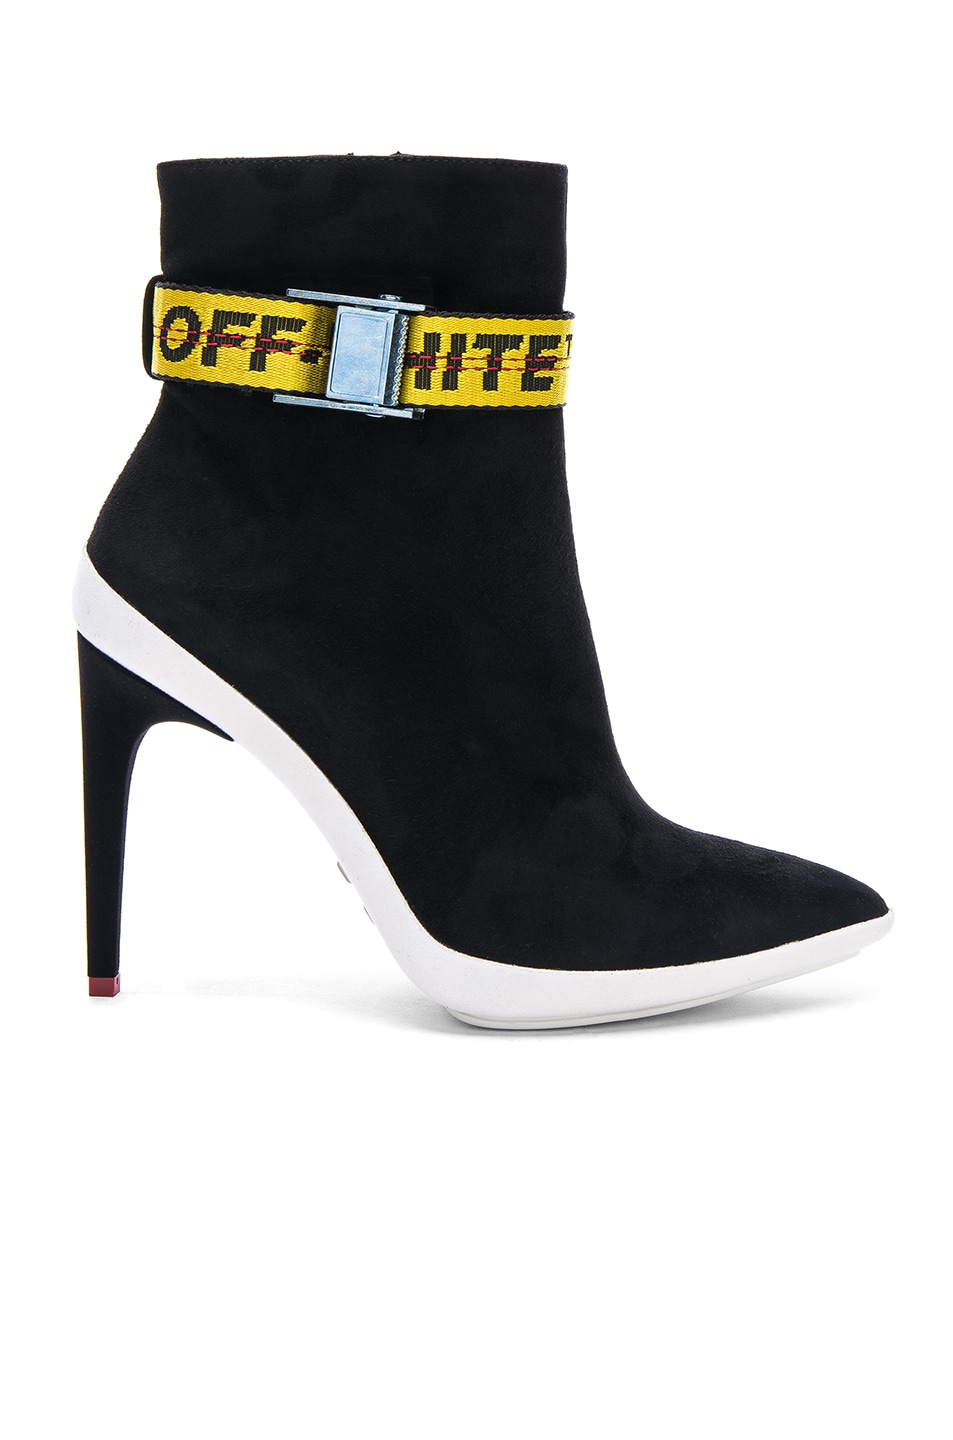 OFF-WHITE Ankle Strap Suede Boots in Black & Yellow | FWRD